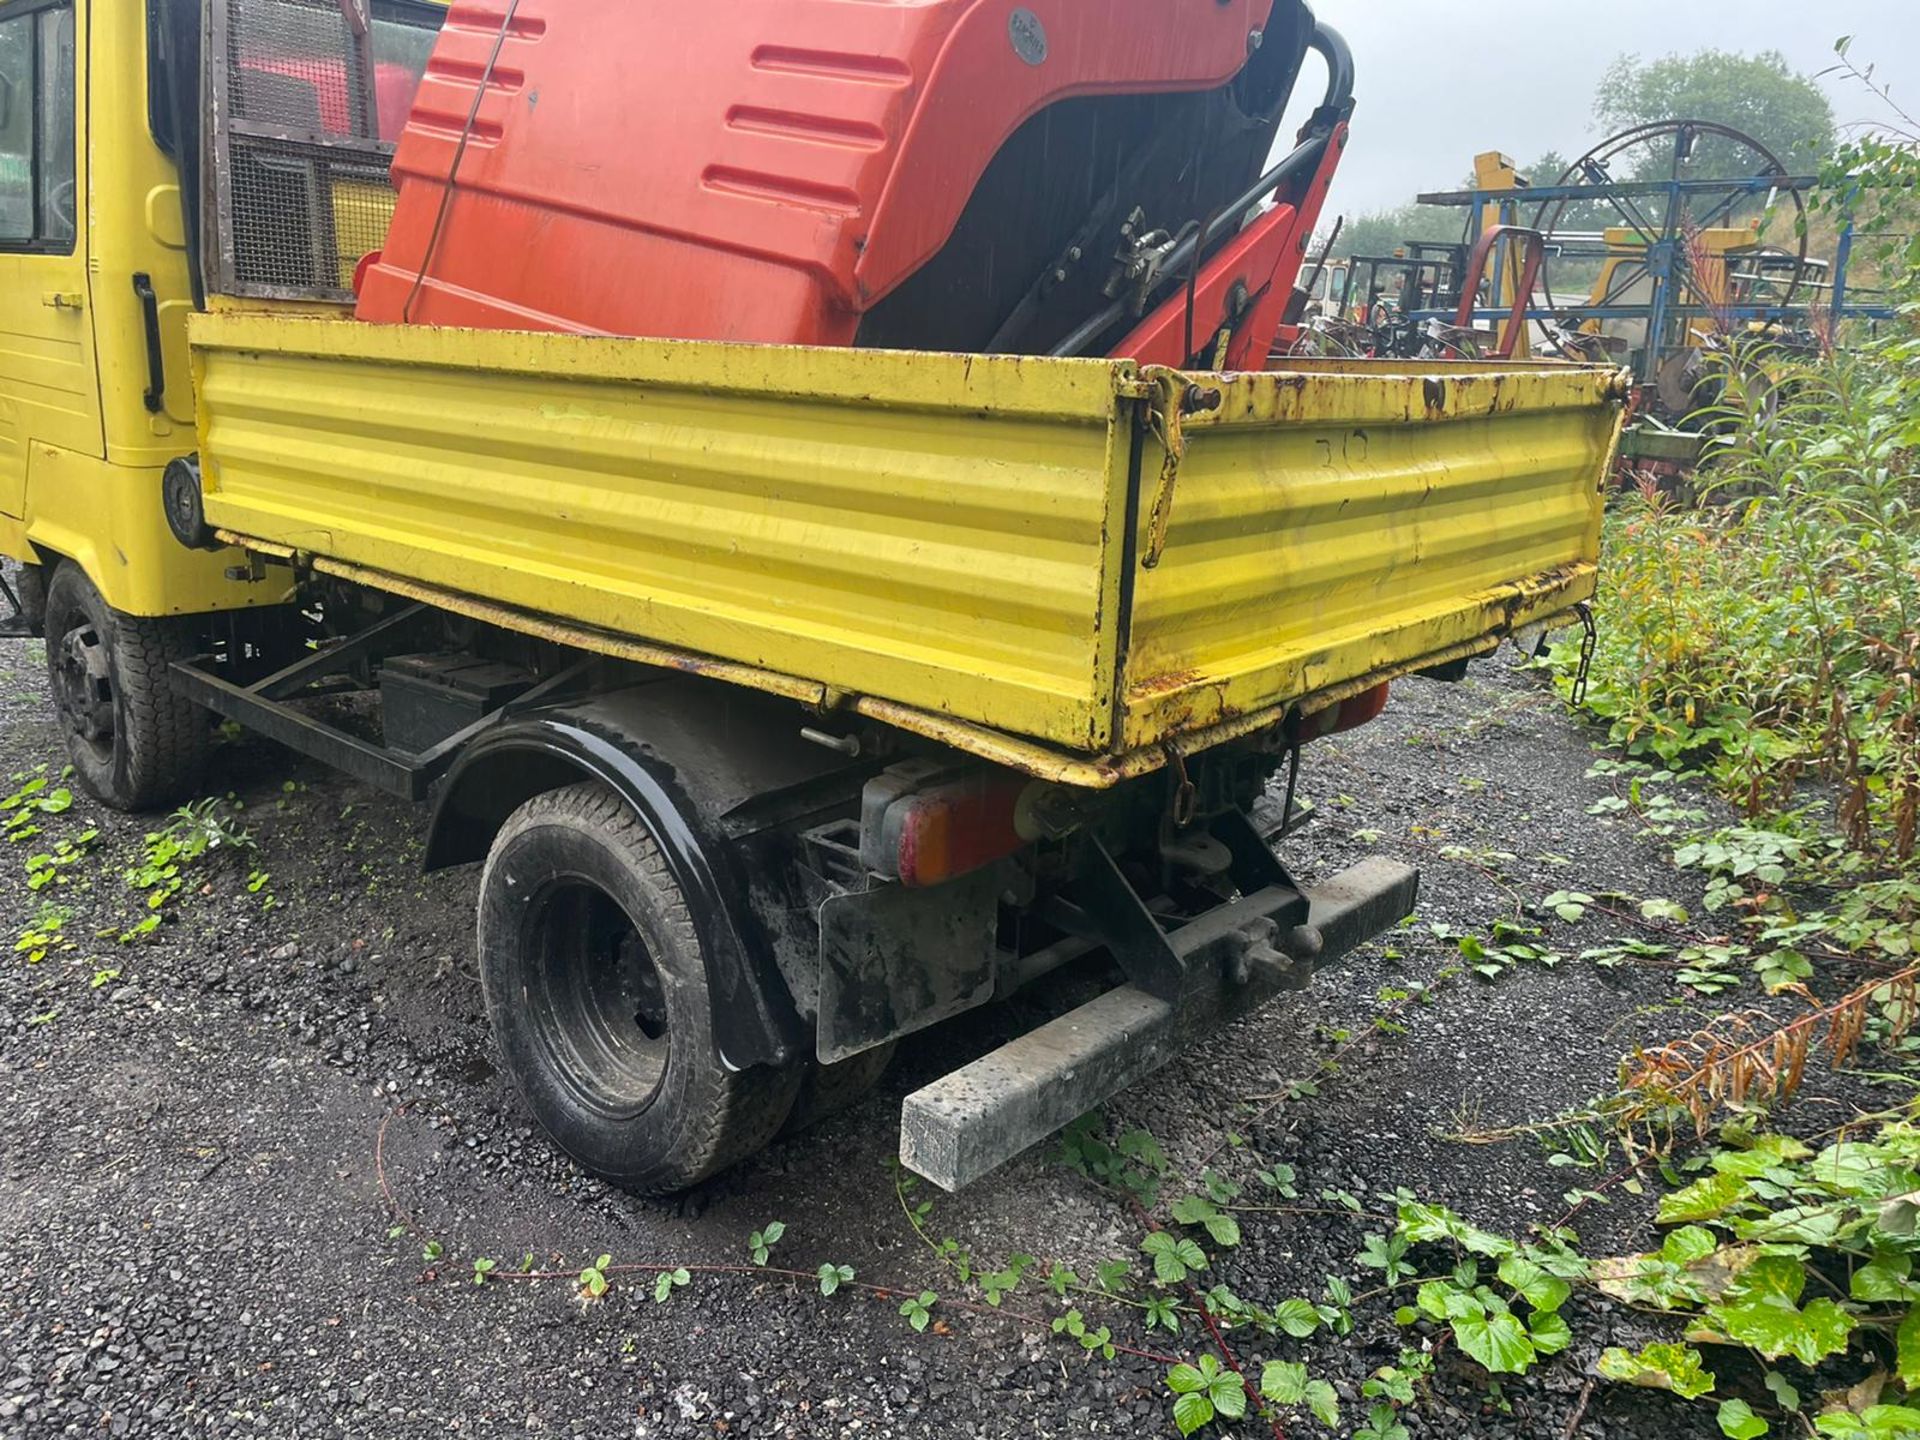 MULTICAR 4x2 3 WAY DROPSIDE TIPPER LORRY, SHOWING 4822 HOURS / 86605km, FRONT HYDRAULICS *PLUS VAT* - Image 4 of 11